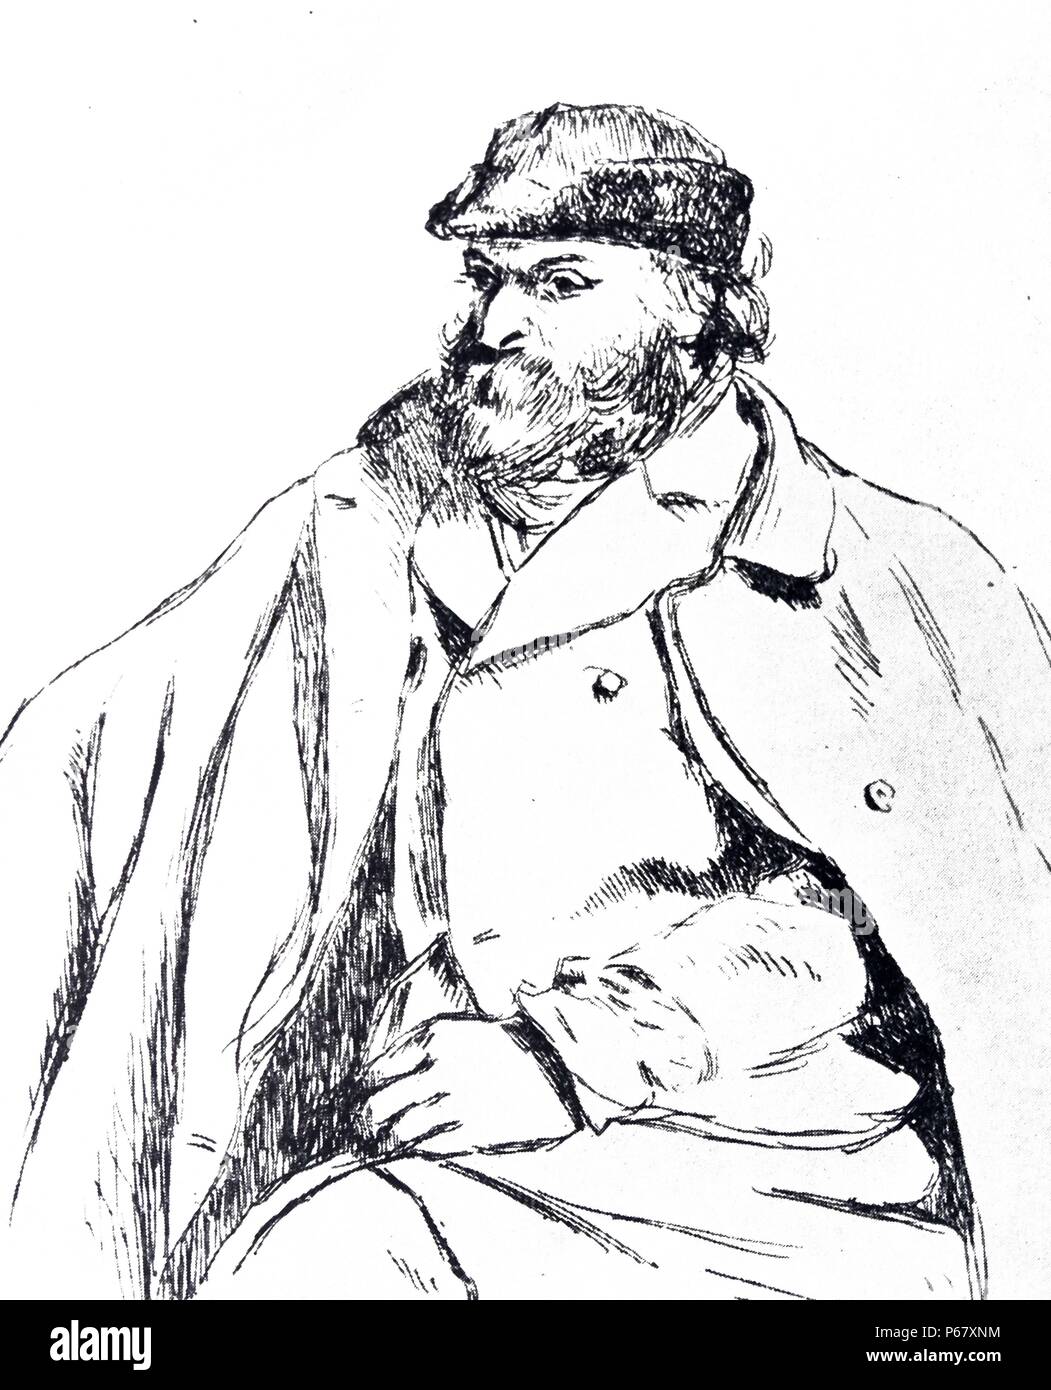 Etching of Paul Cézanne (1839-1906) French artist and Post-Impressionist painter. By Camille Pissarro (1830-1903) Danish-French Impressionist and Neo-Impressionist painter. Dated 1874 Stock Photo